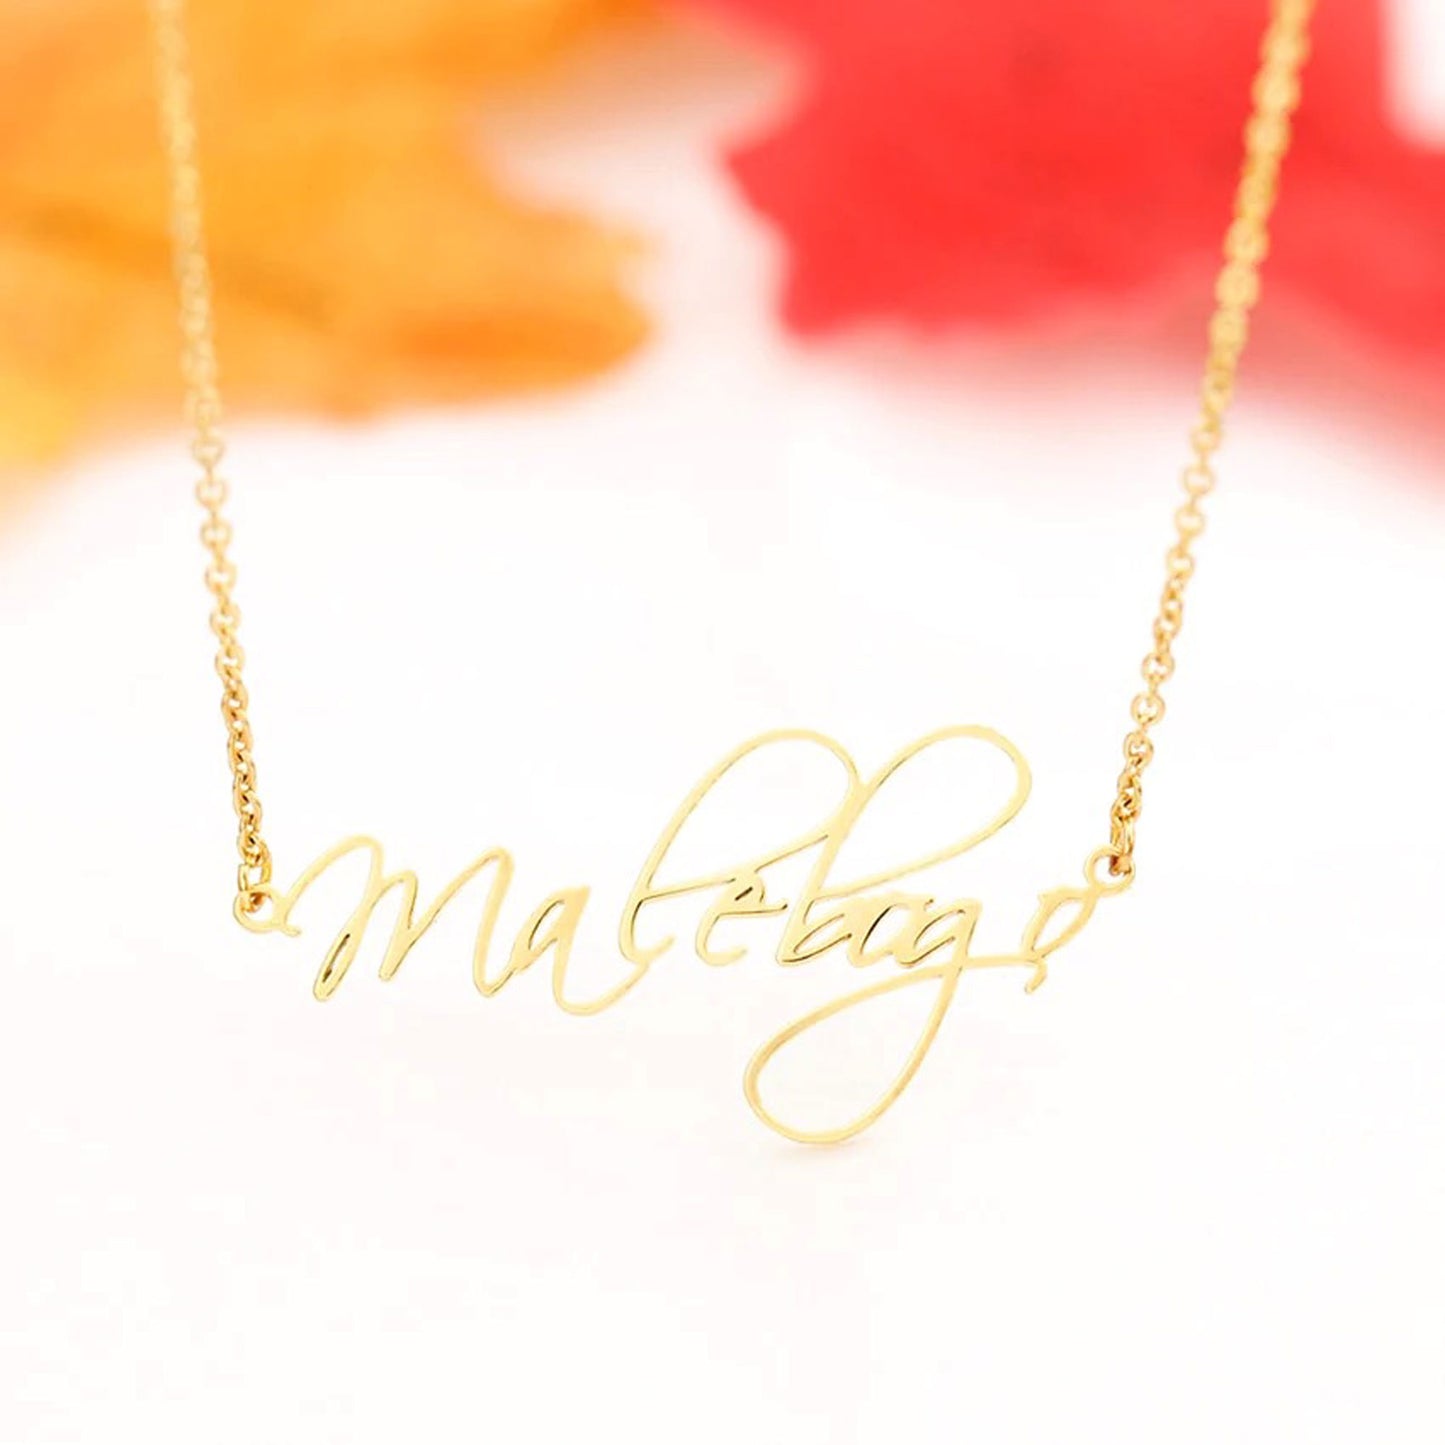 Detail of a gold-tone link chain and a personalized script name necklace.